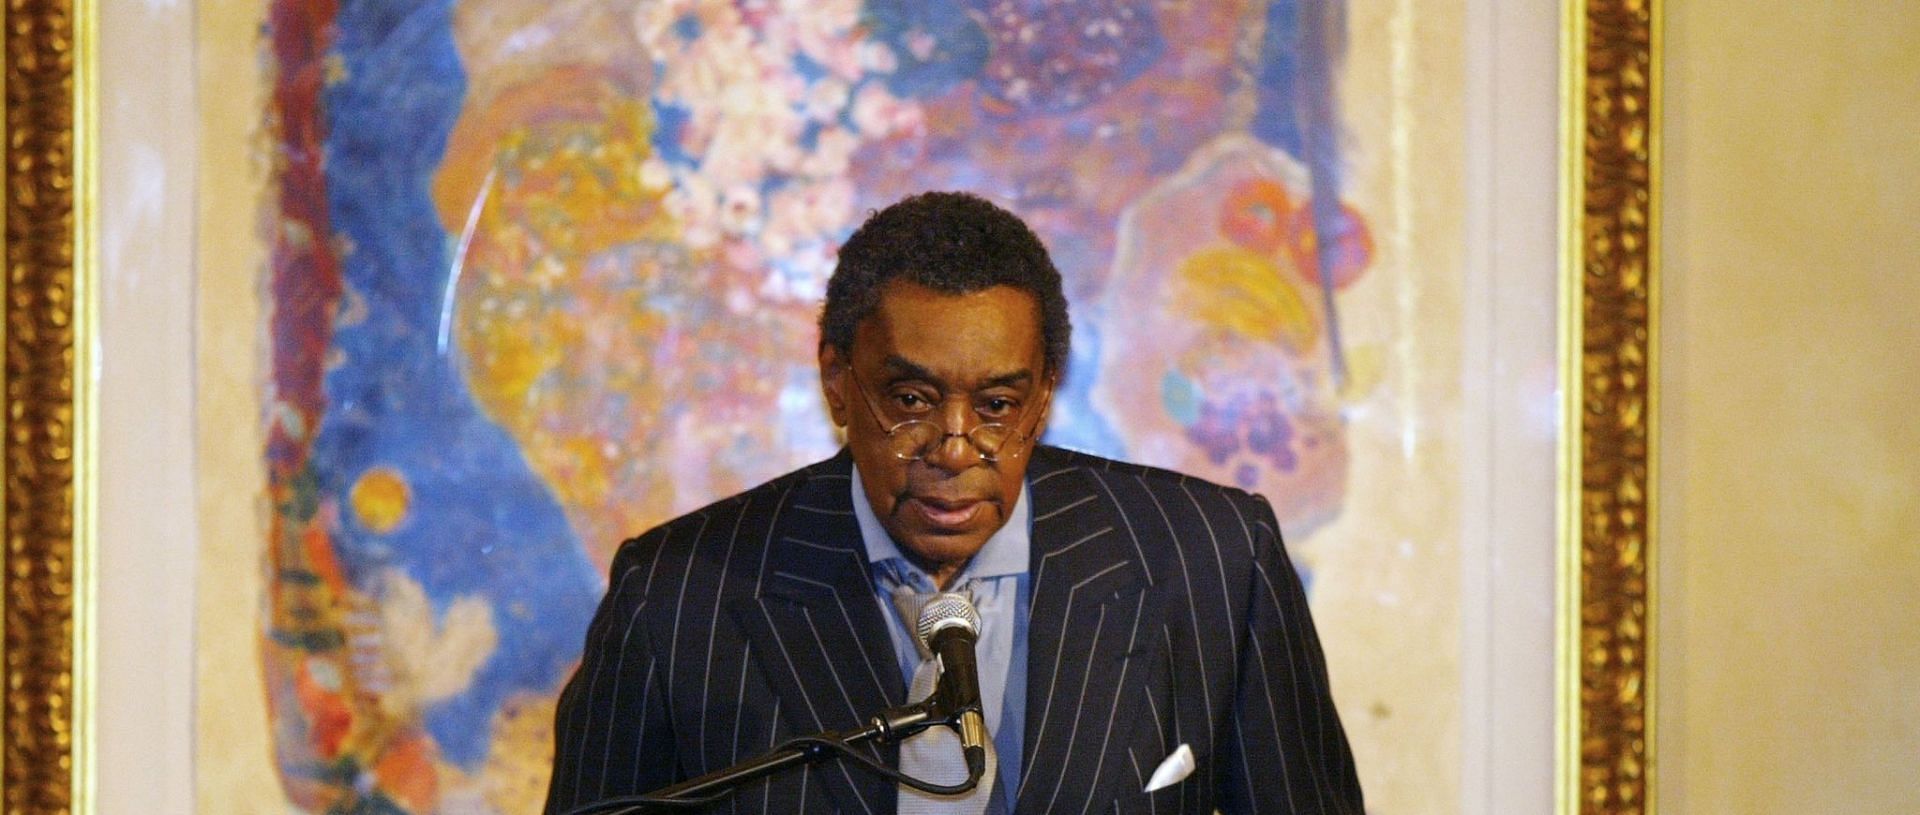 Tony Cornelius denied all the allegations made against his father Don Cornelius (Image via Frederick M. Brown/Getty Images)